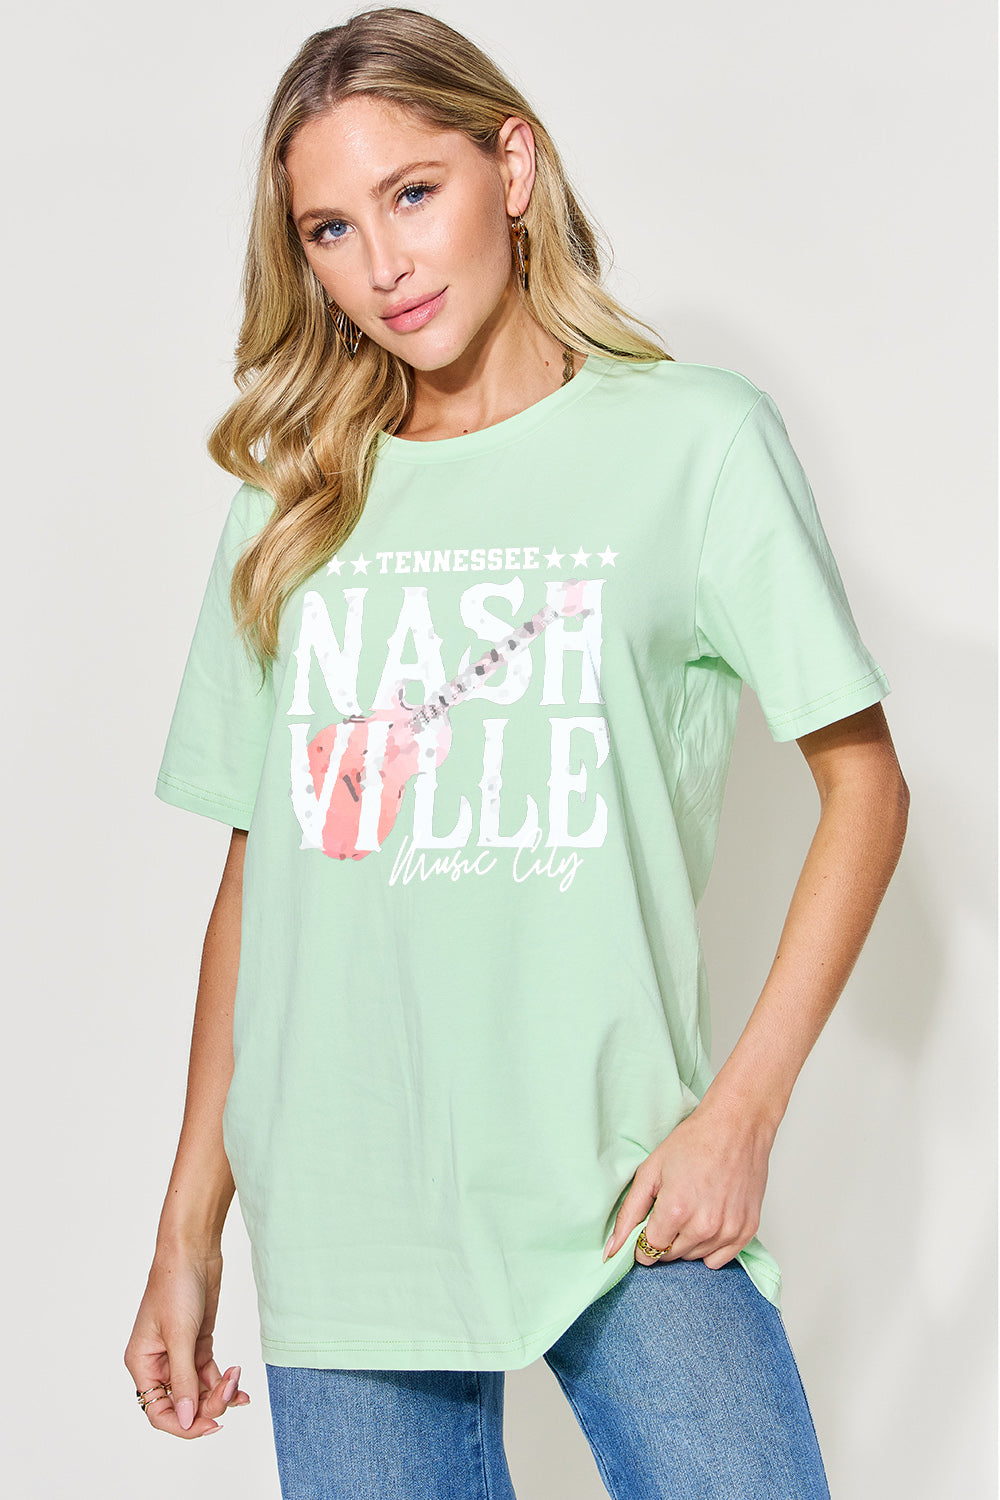 Letter Graphic Round Neck Short Sleeve T-Shirt | Tee - CHANELIA